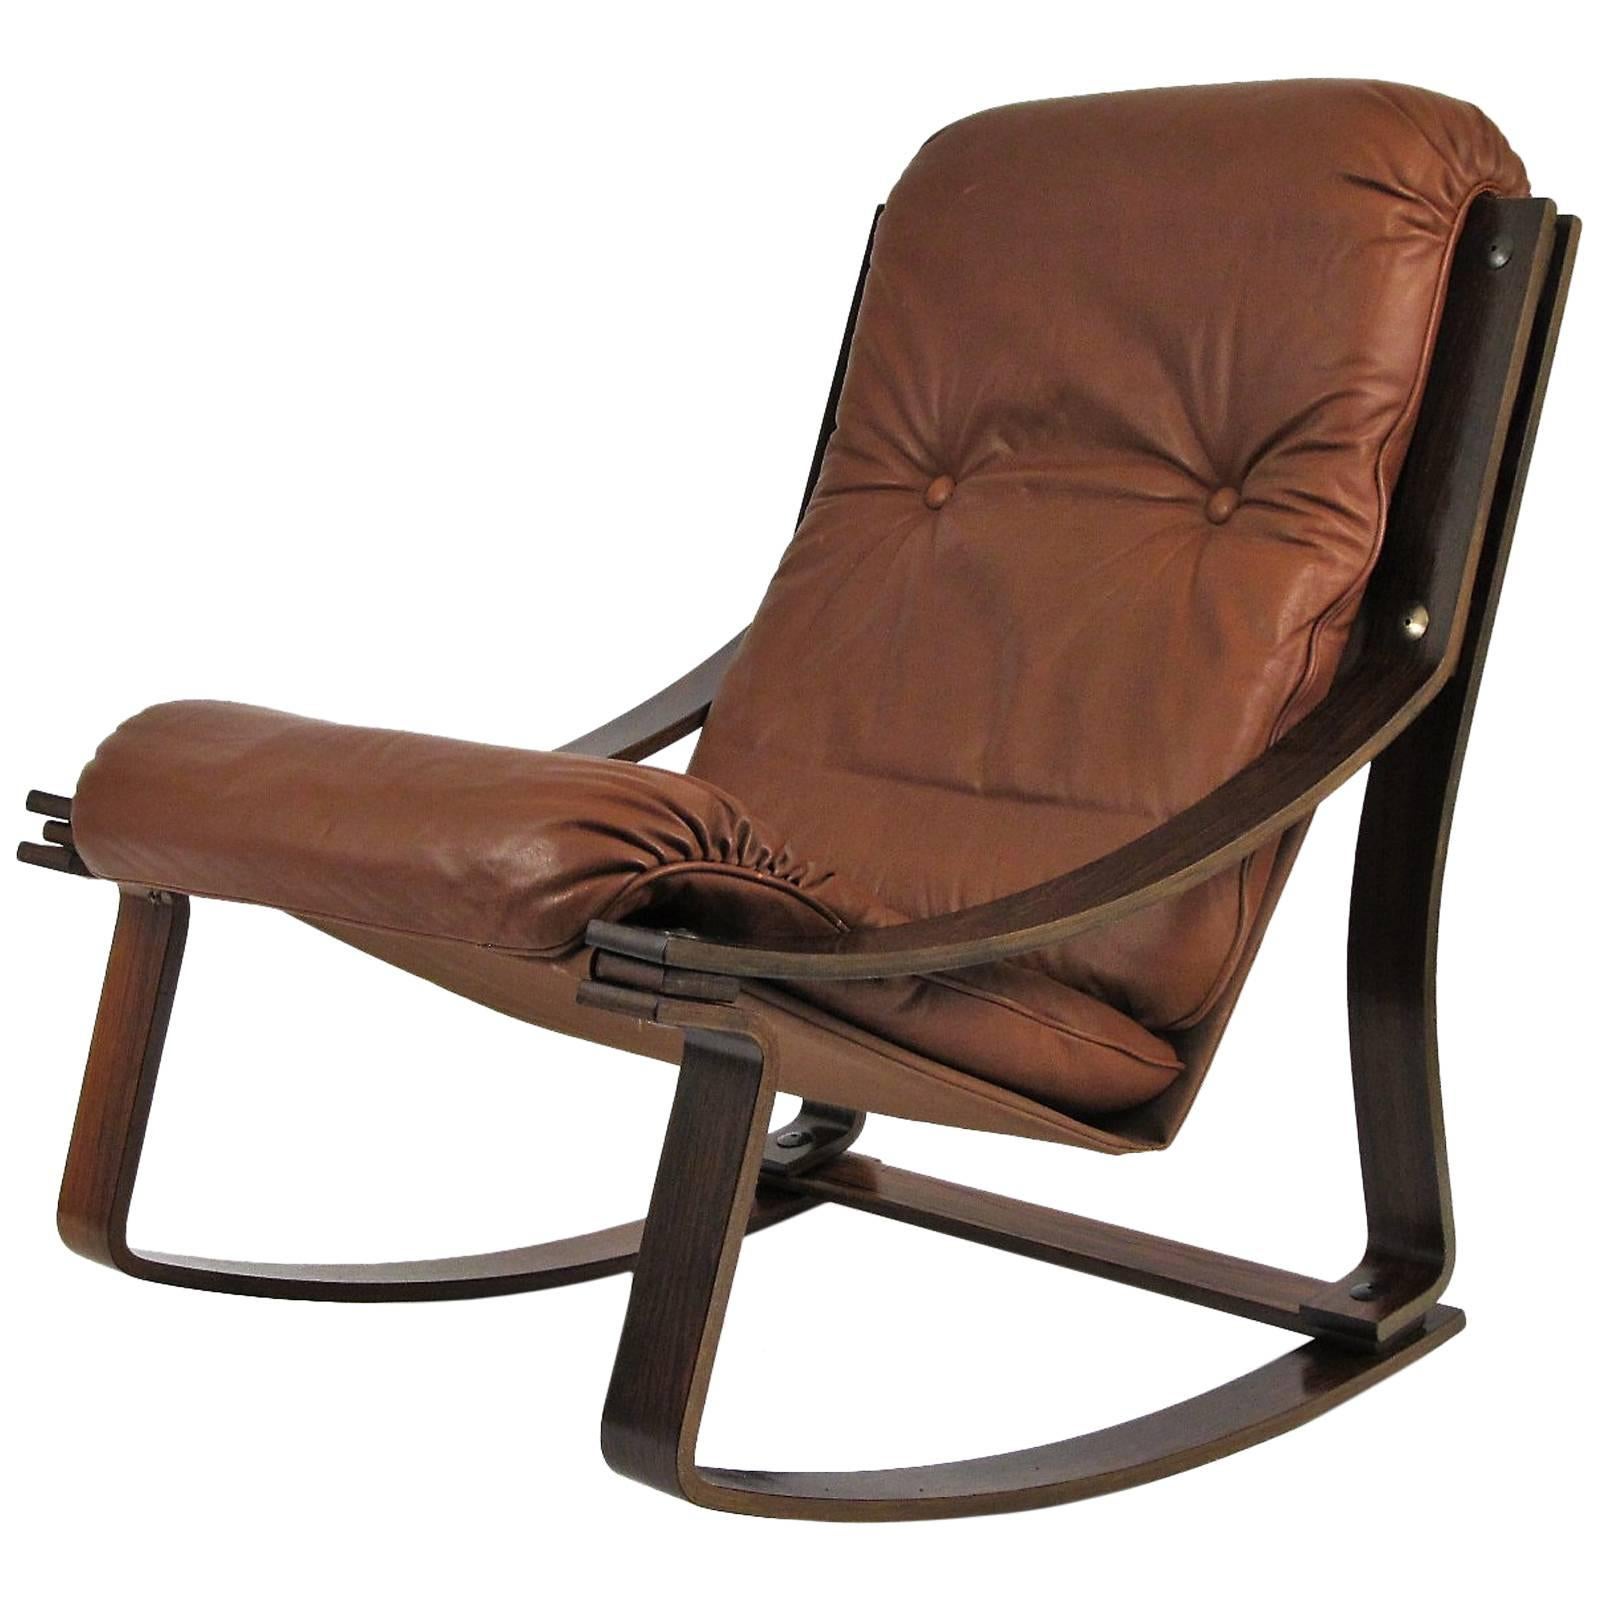 Rosewood and Leather Westnofa Norwegian Rocking Chair  